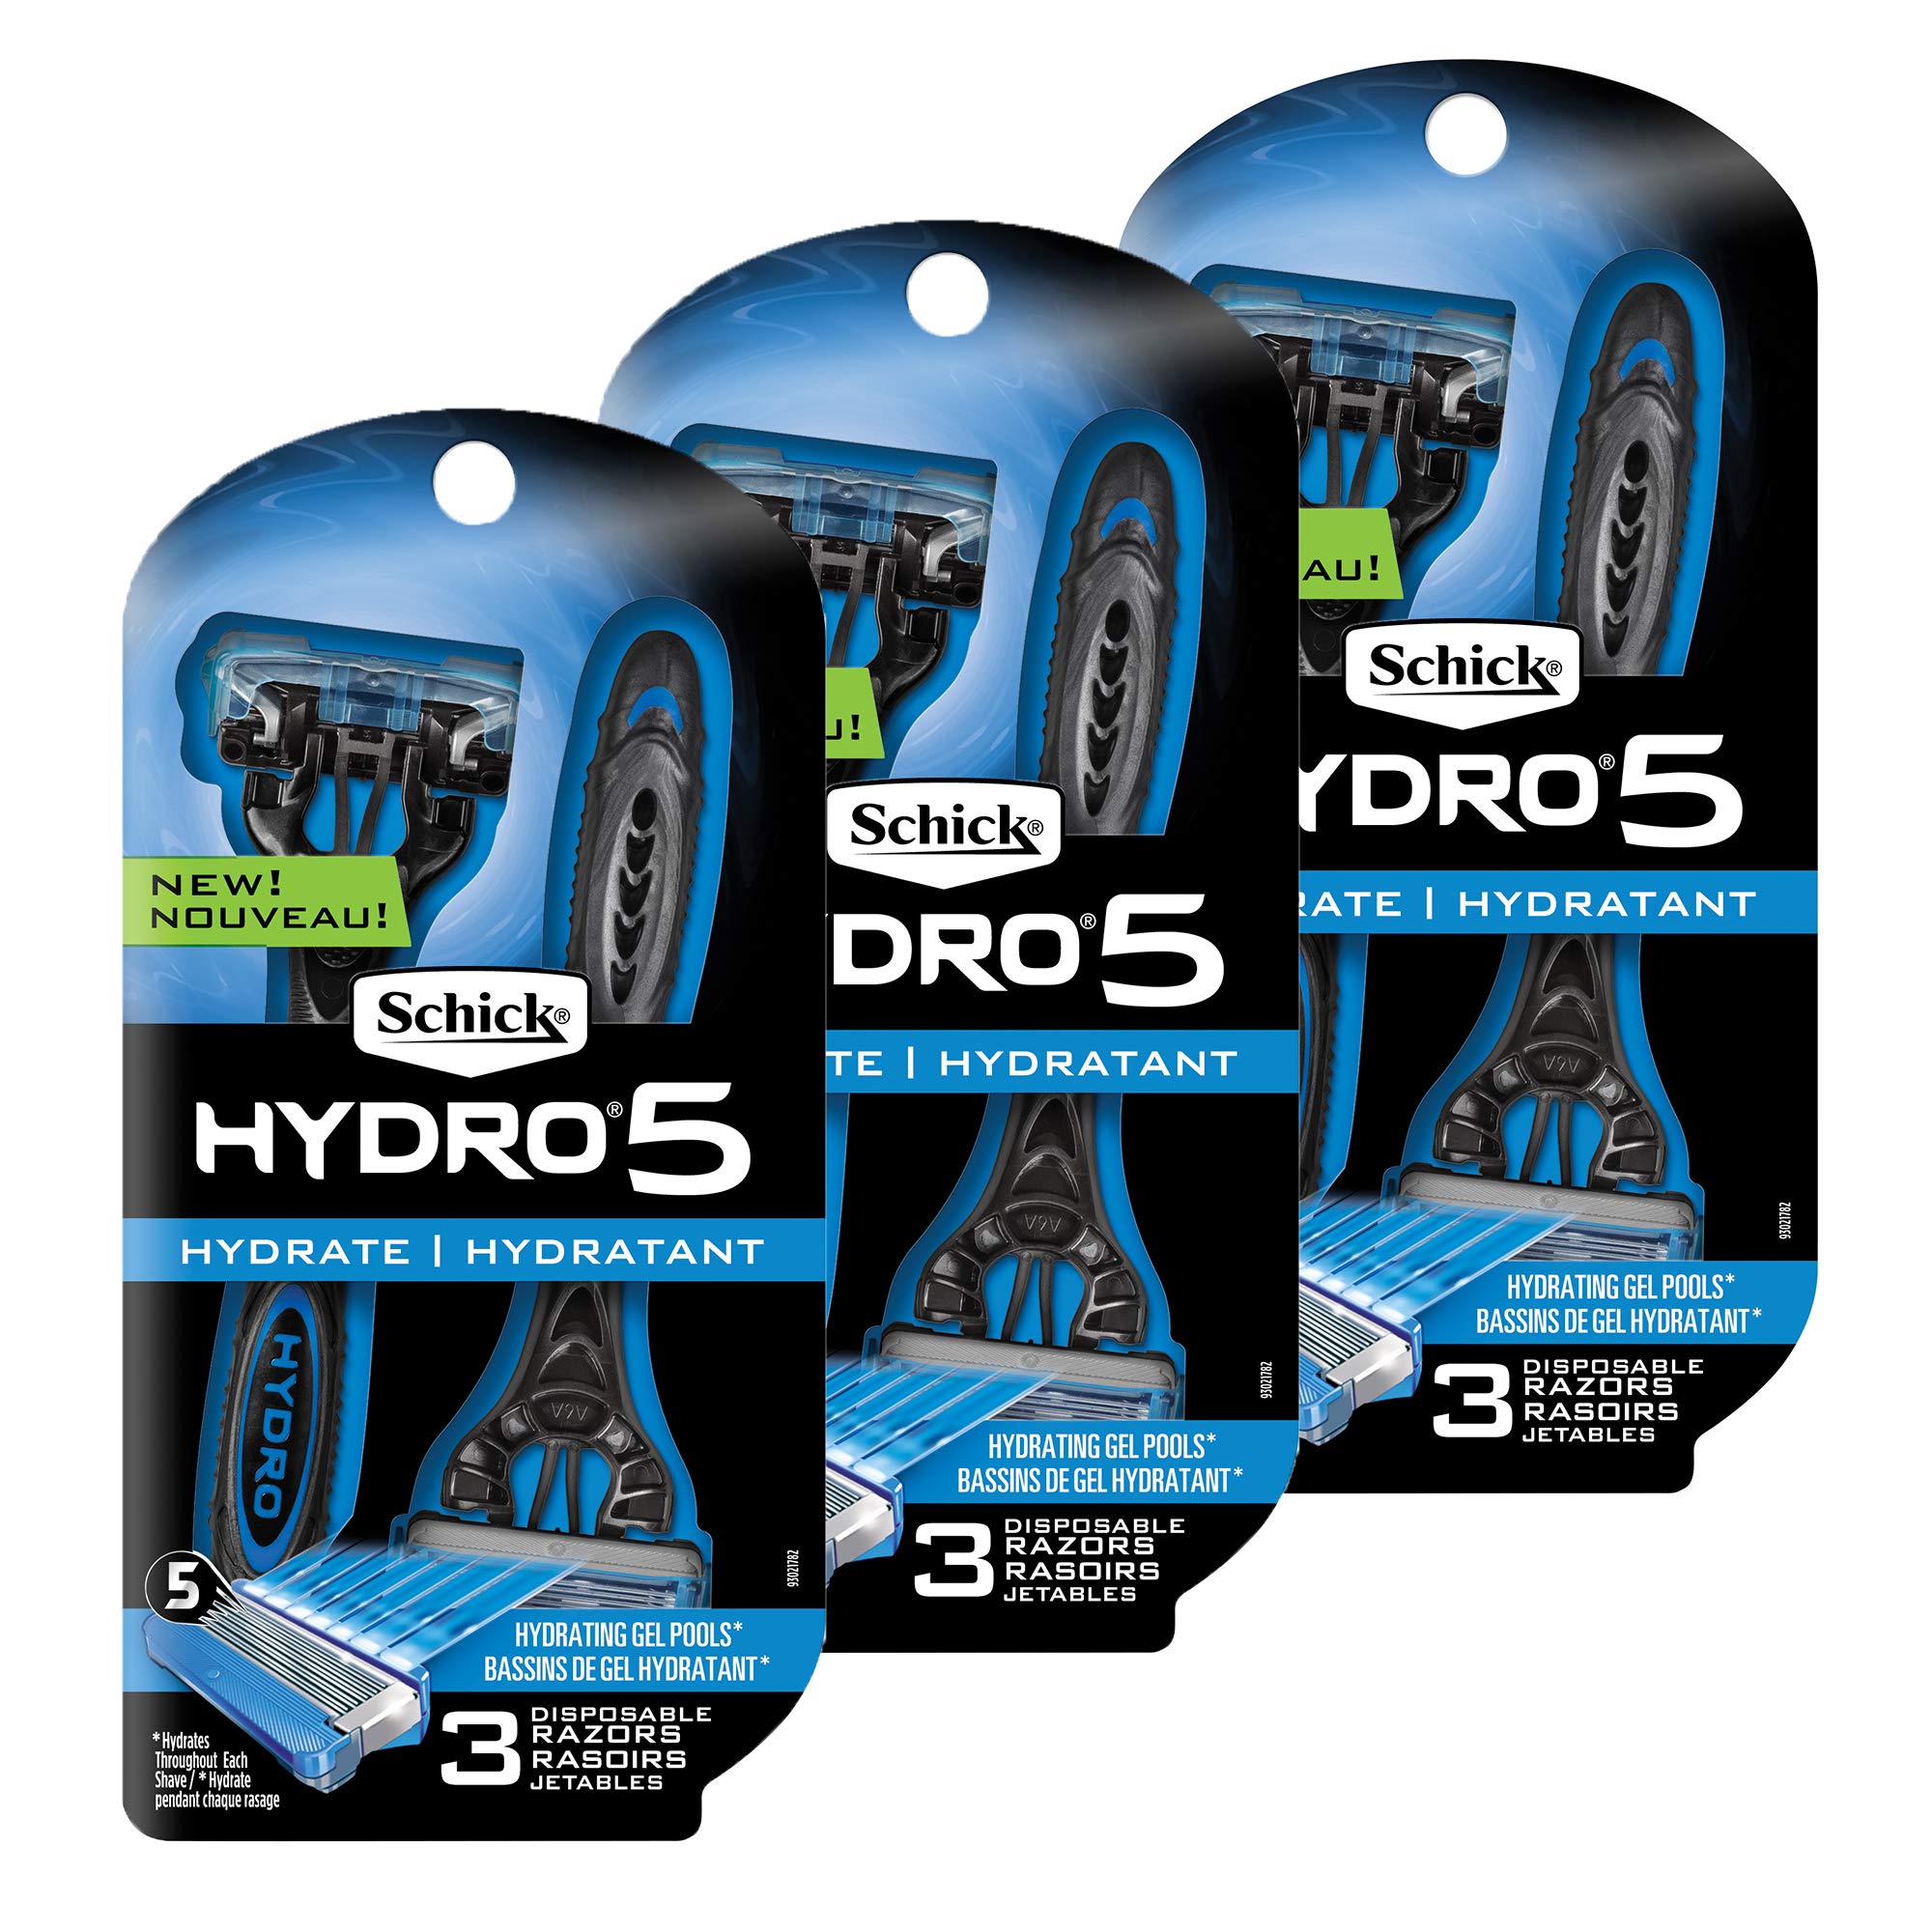 Schick Hydro 5 Hydrate Men's Disposable Razors, 3 Count - image 1 of 8